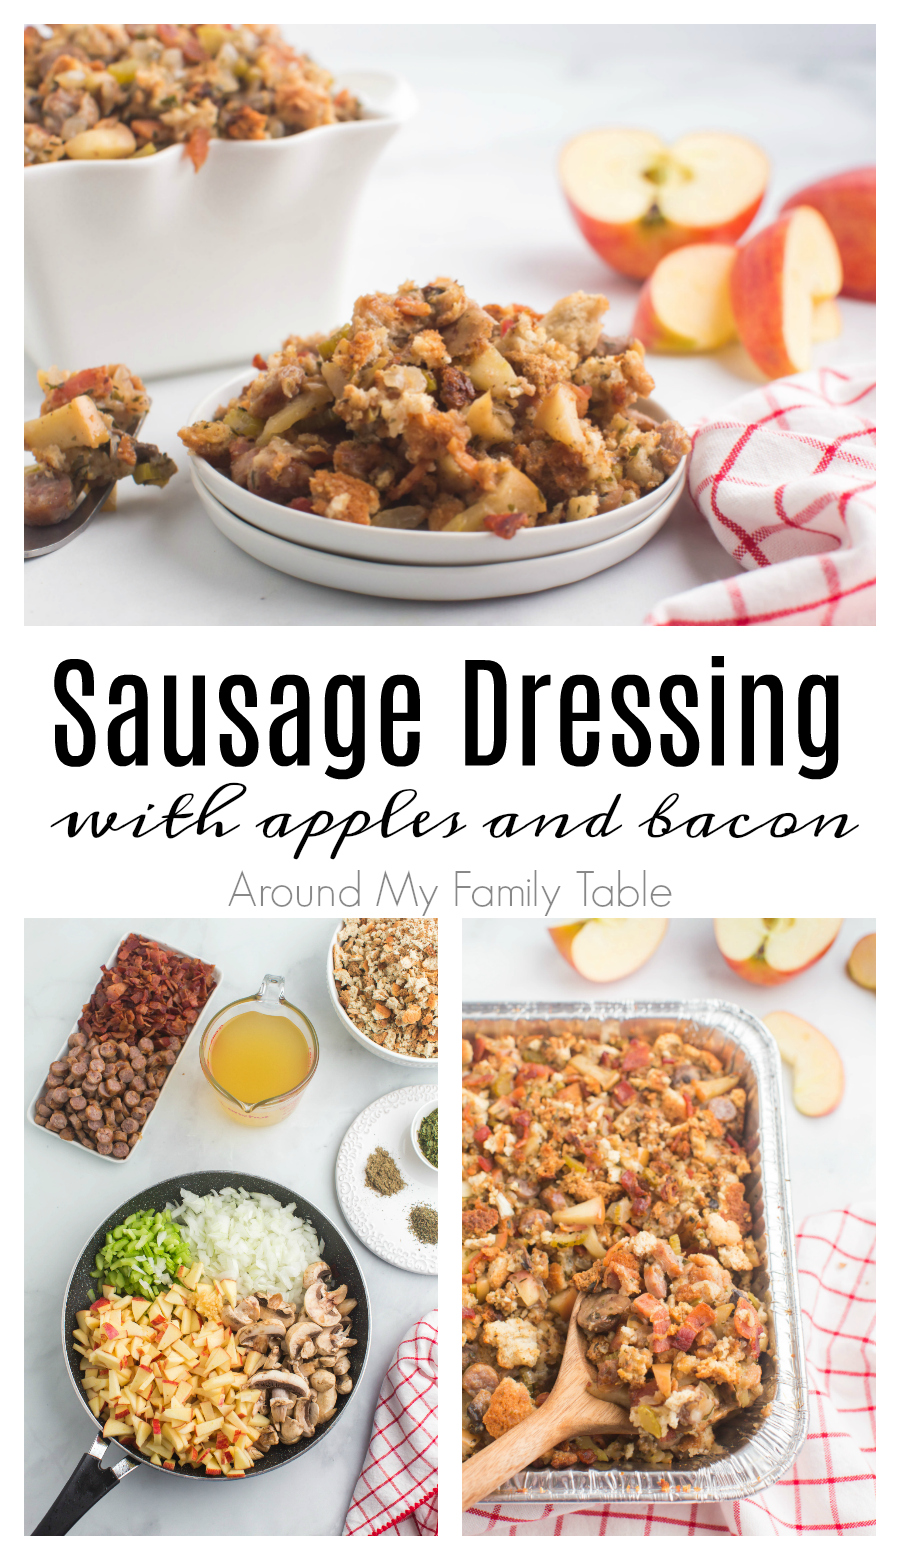 Sausage dressing is a classic with holiday turkey. Make this easy holiday side dish recipe with apples and bacon for fantastic flavor. The perfect side dish for Thanksgiving, Christmas, and even Easter. via @slingmama